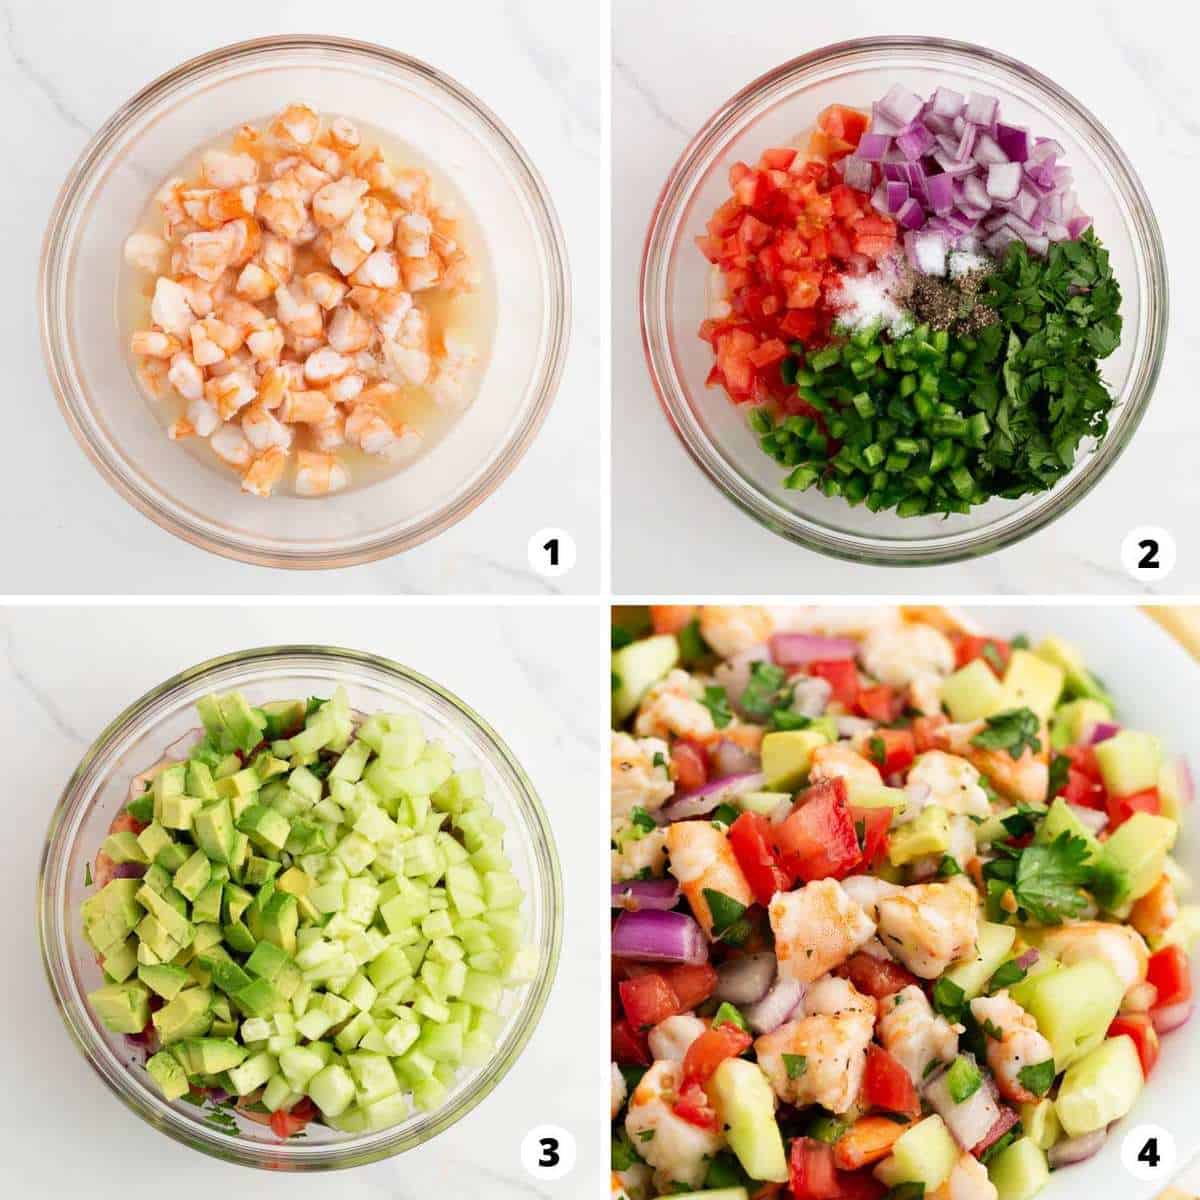 Step by step collage showing how to make ceviche. 